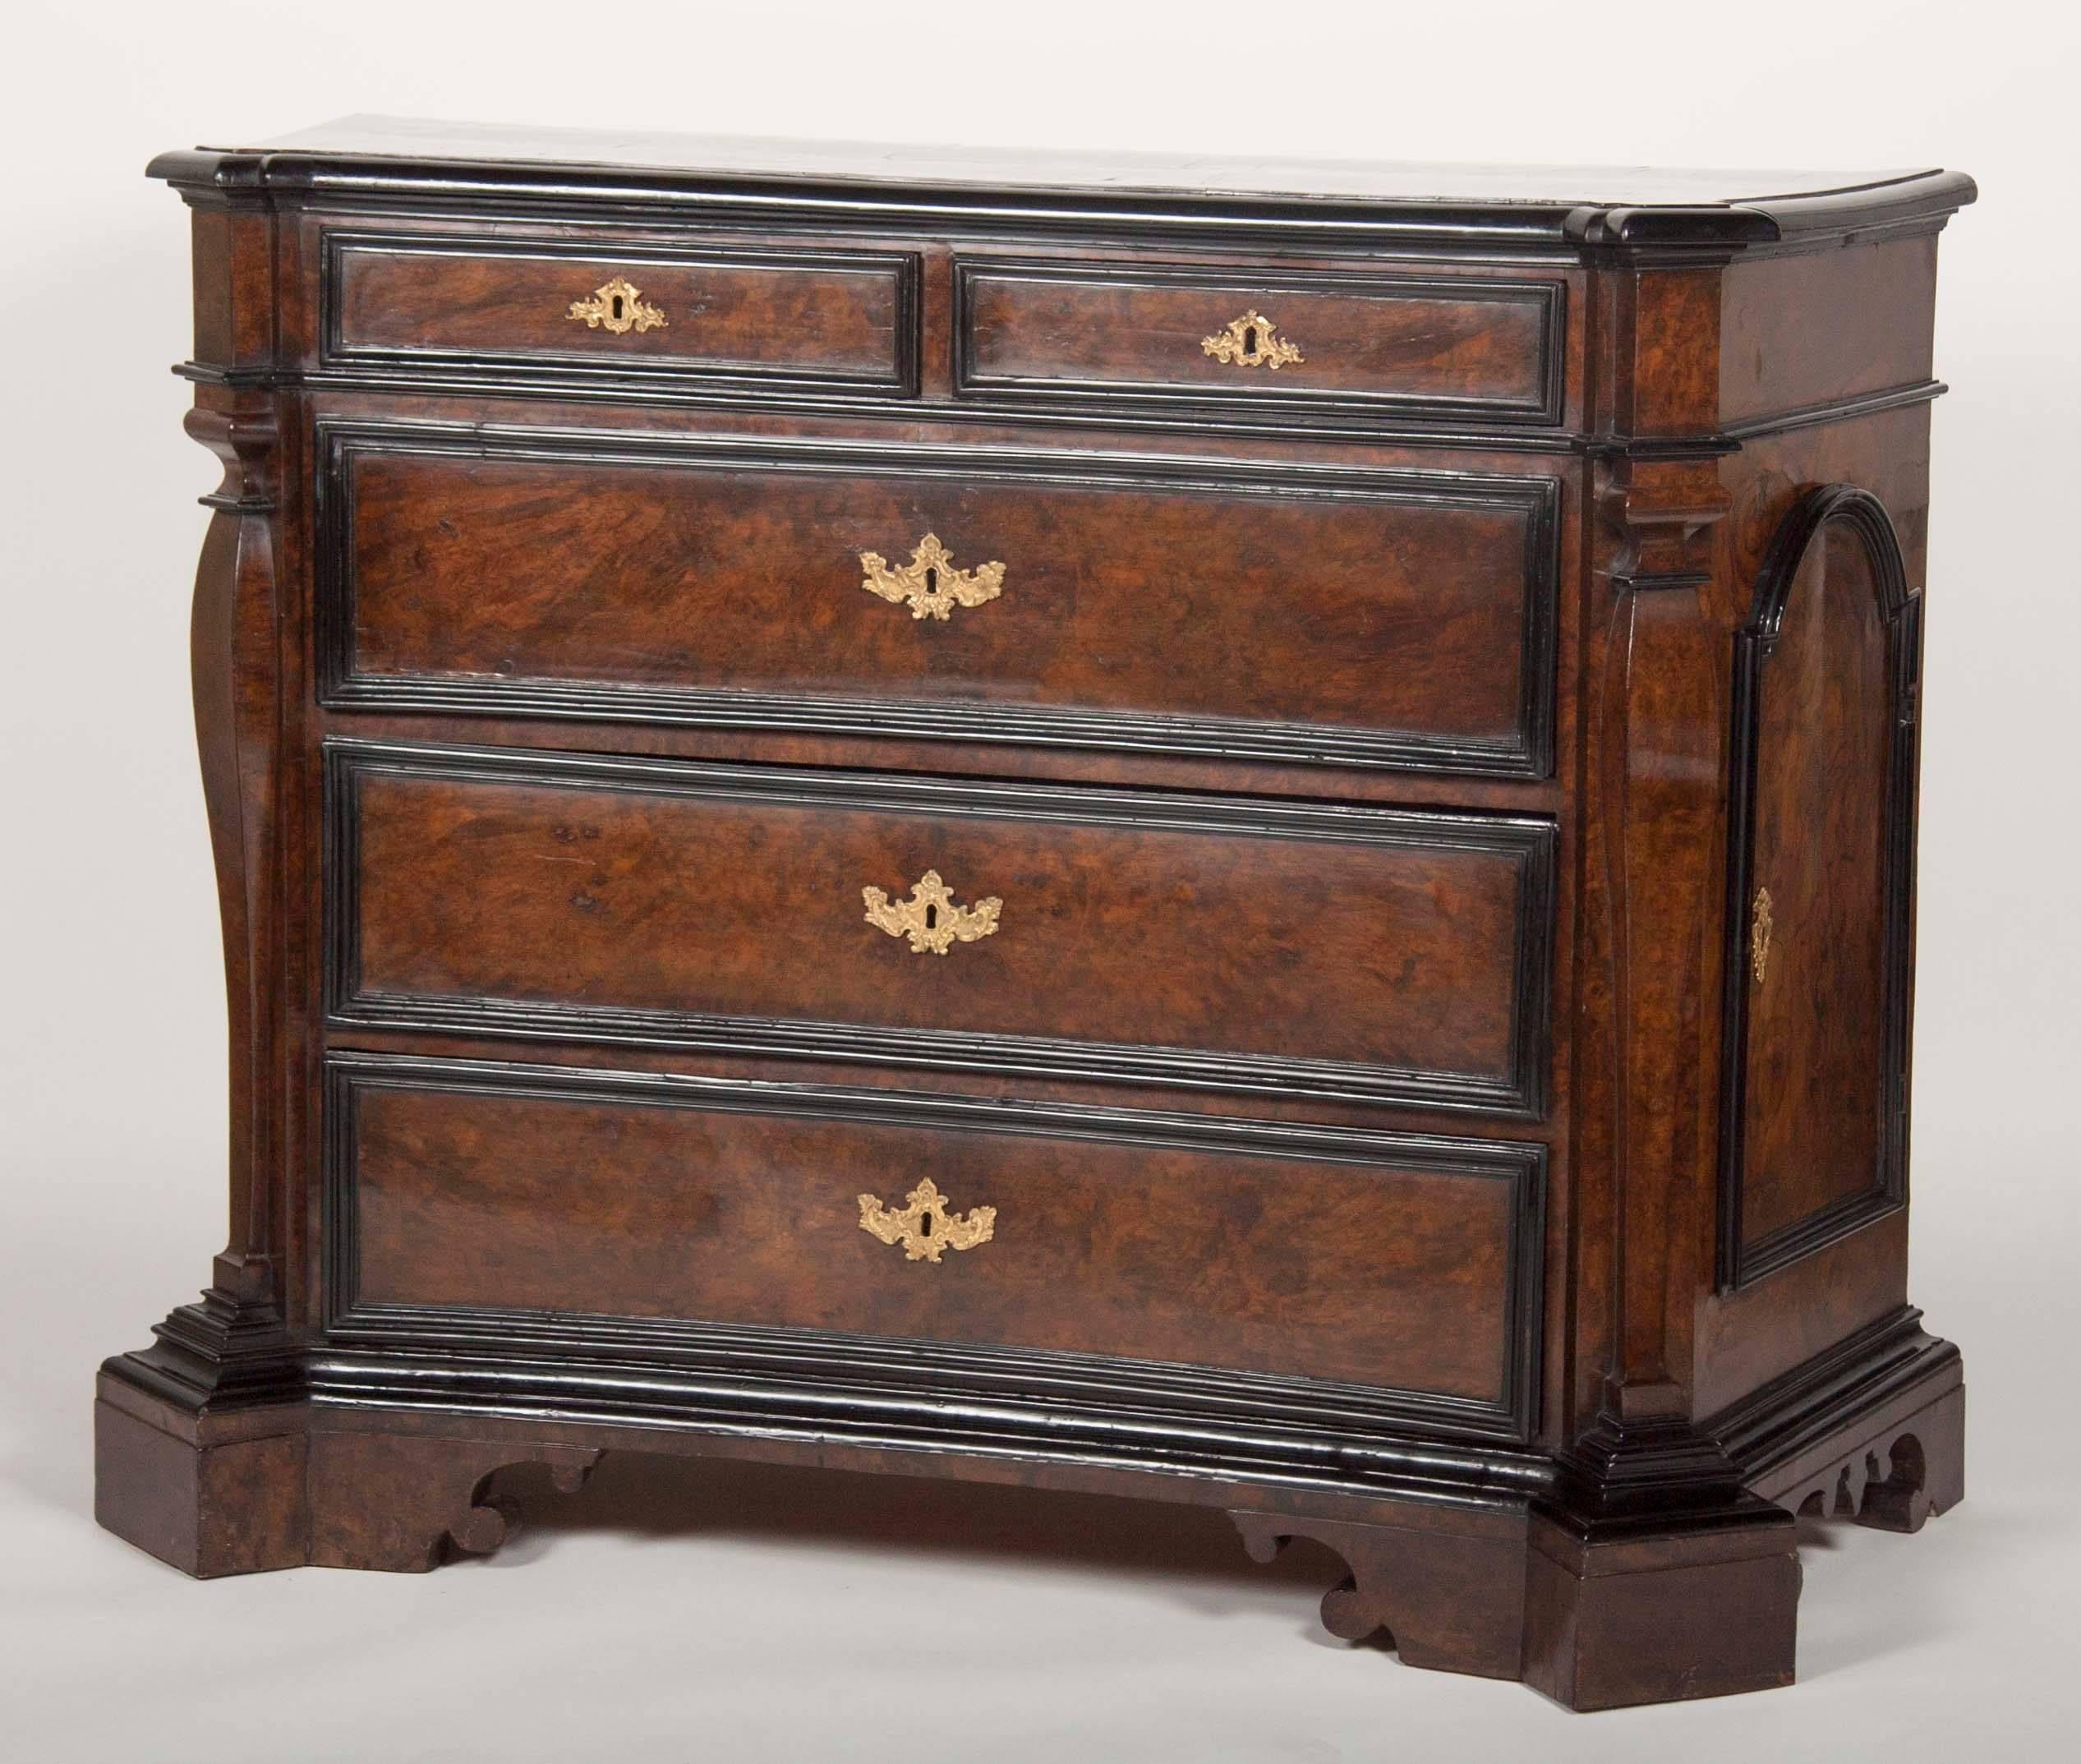 Impressive pair of Italian Roman Baroque burl walnut commodes or chest of drawers, 17th century.
 
Each chest of drawers in burl walnut with a concave top sitting above five concaves drawers, a cupboard door on each side and with a front shaped